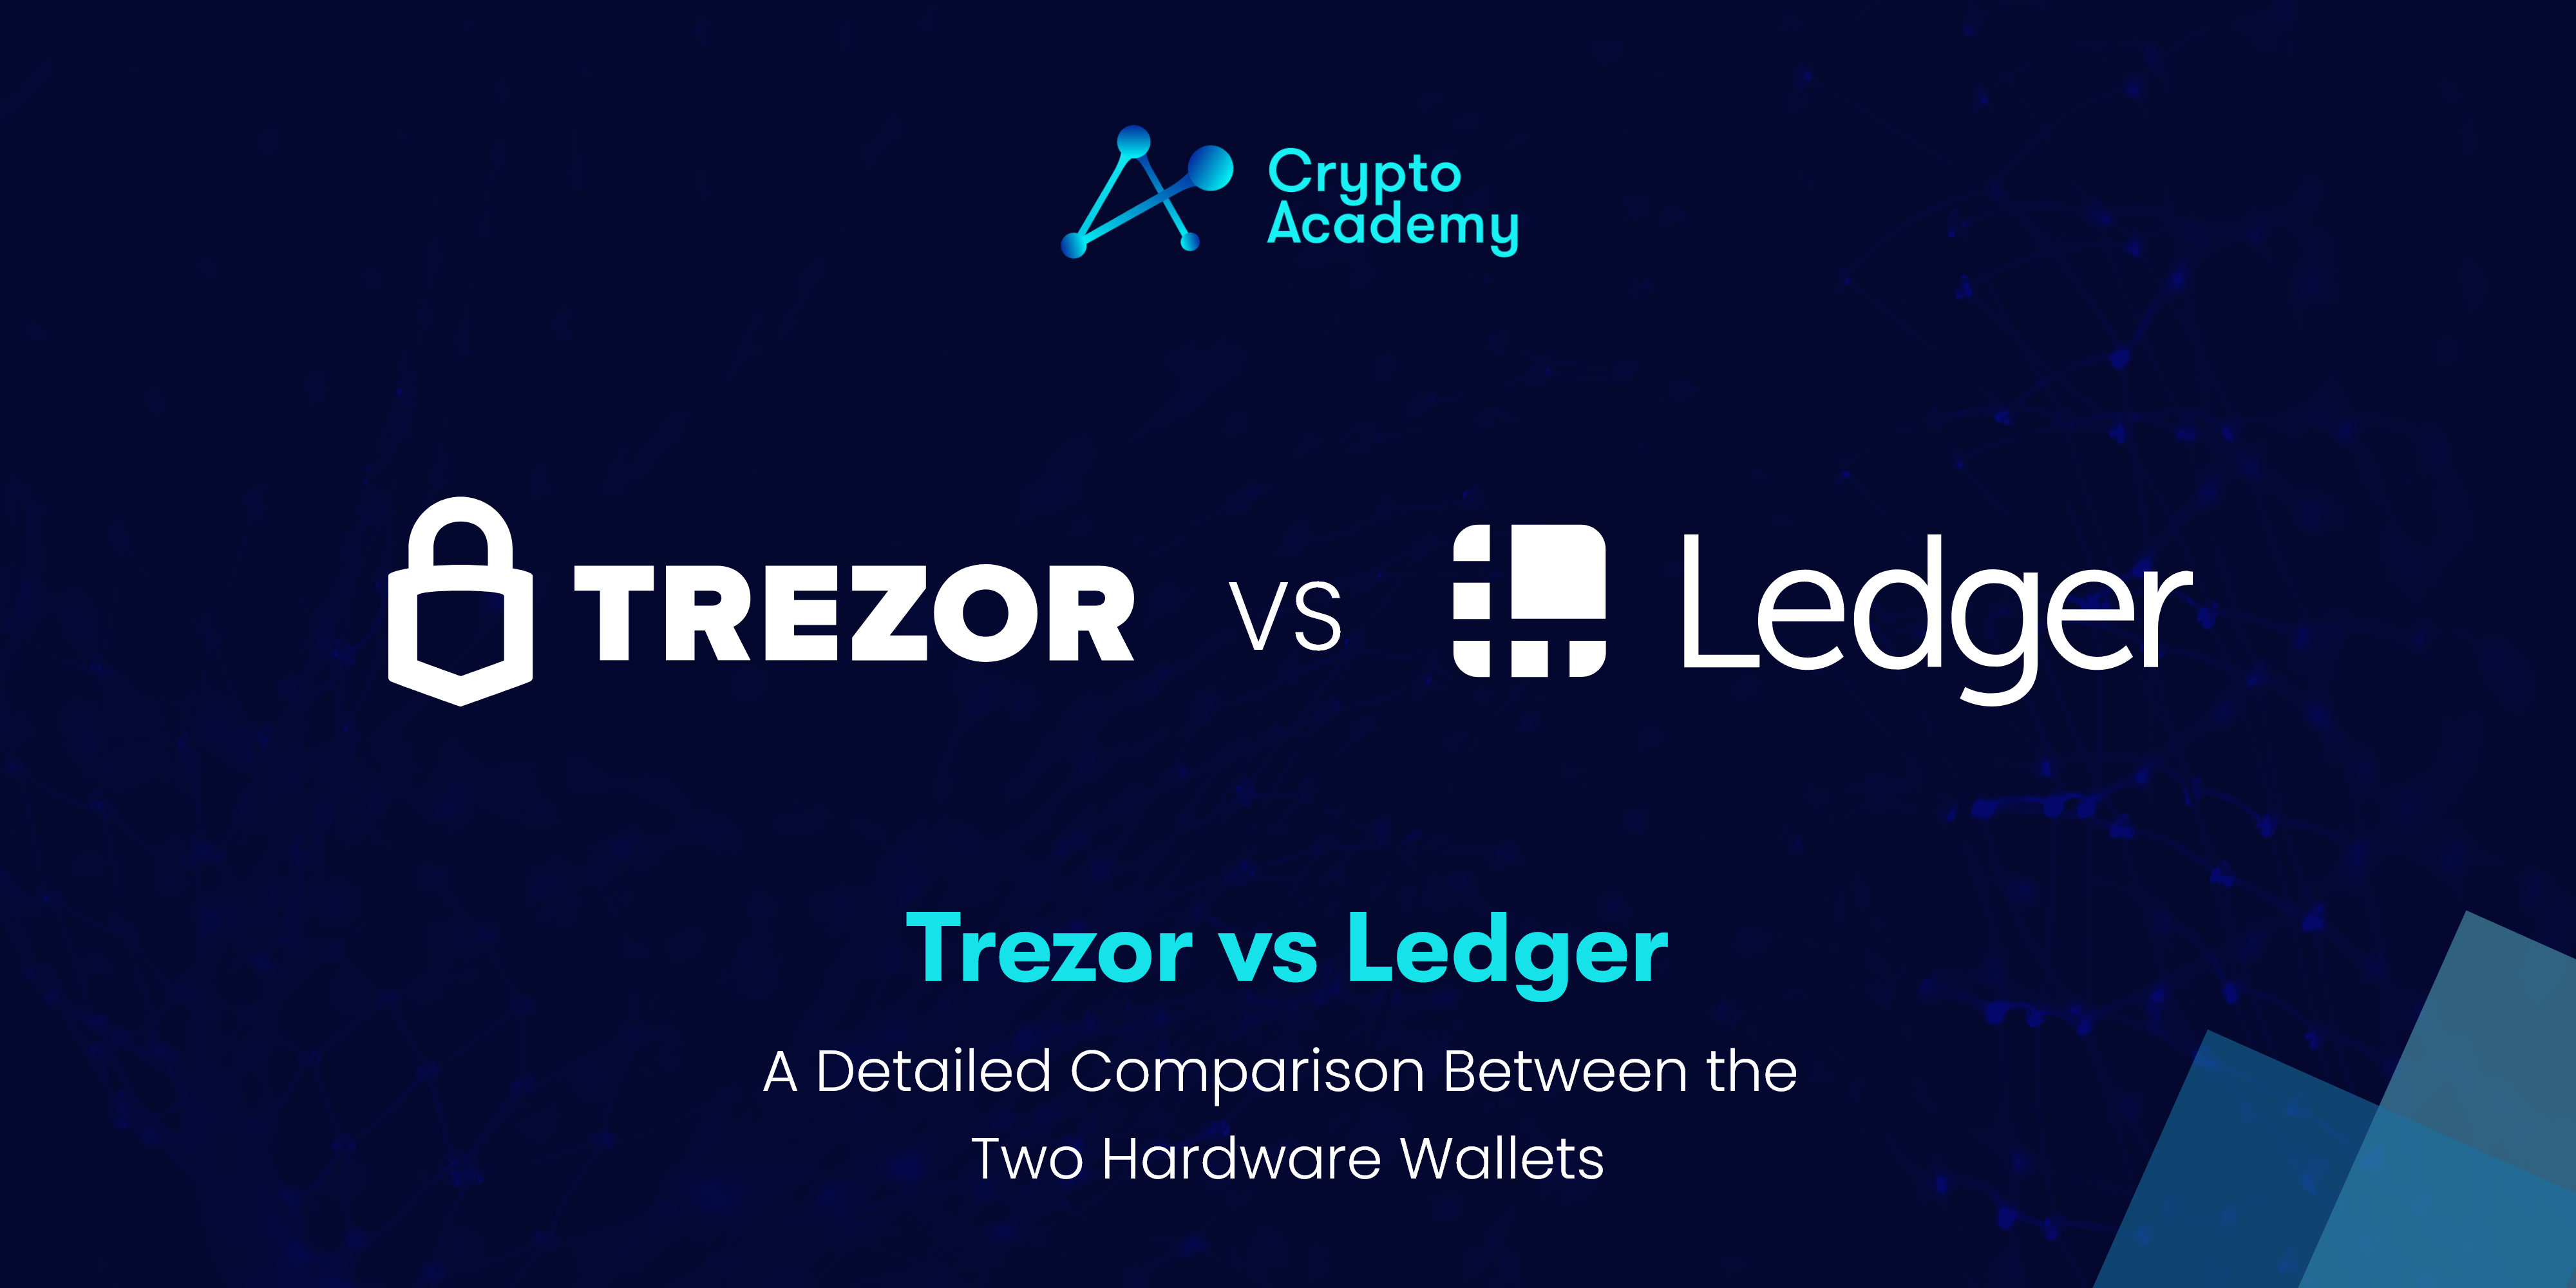 Trezor vs Ledger – A Detailed Comparison Between the Two Hardware Wallets